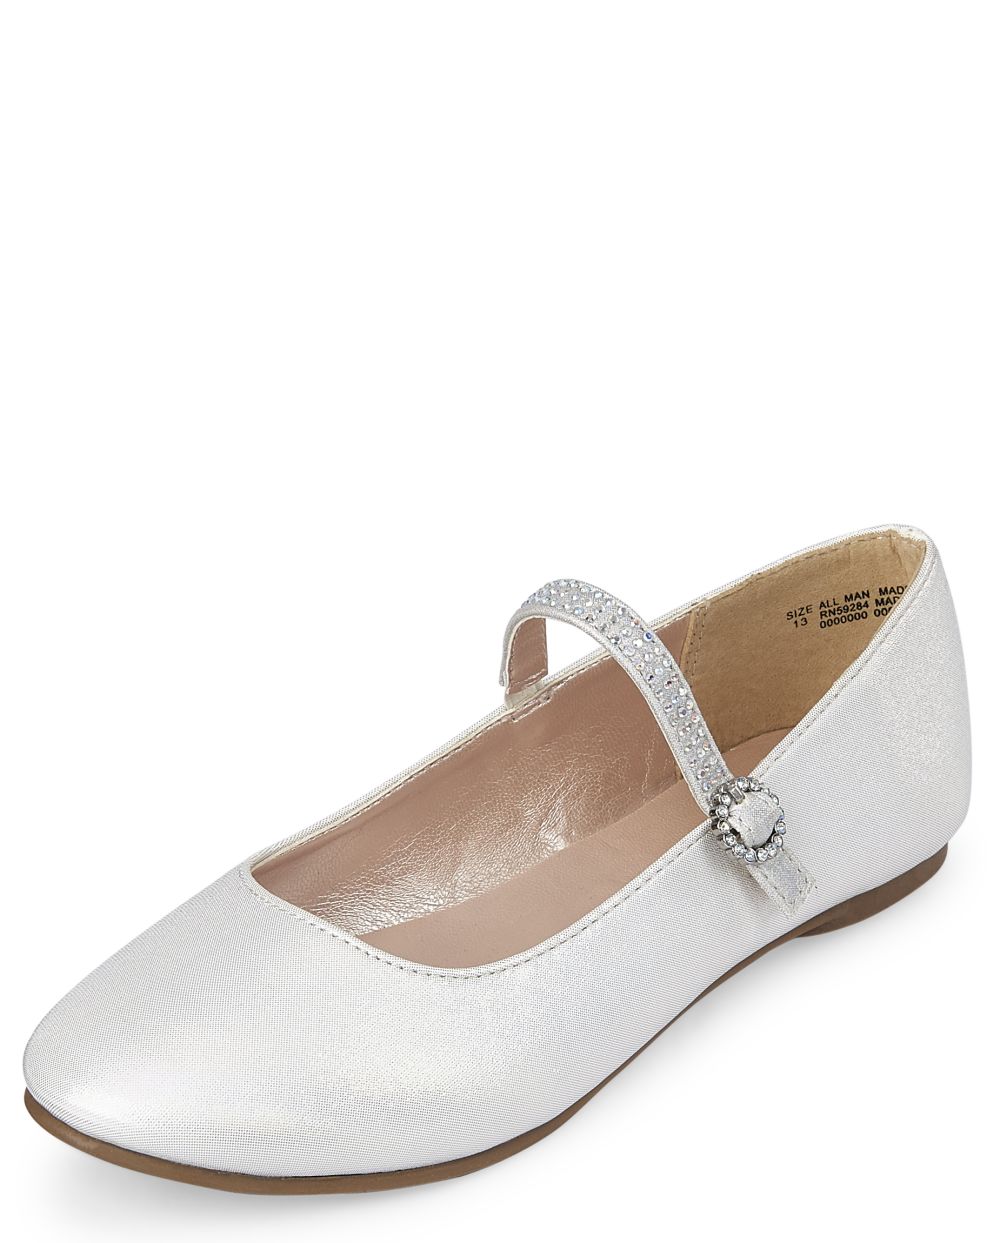 

Girls Jeweled Iridescent Ballet Flats - White - The Children's Place